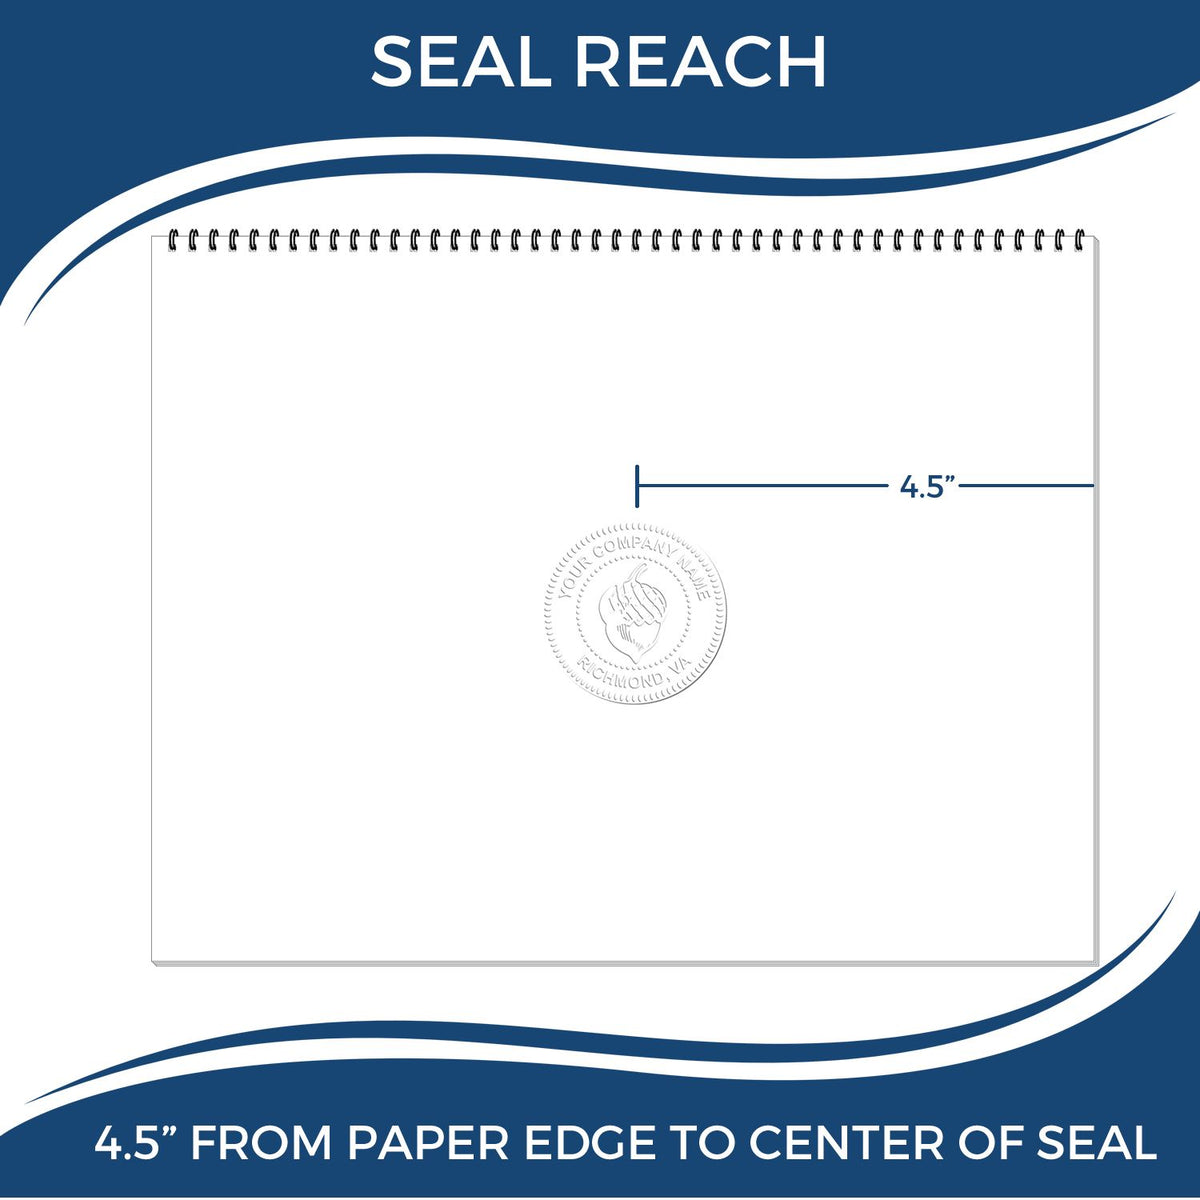 An infographic showing the seal reach which is represented by a ruler and a miniature seal image of the Extended Long Reach New Mexico Architect Seal Embosser